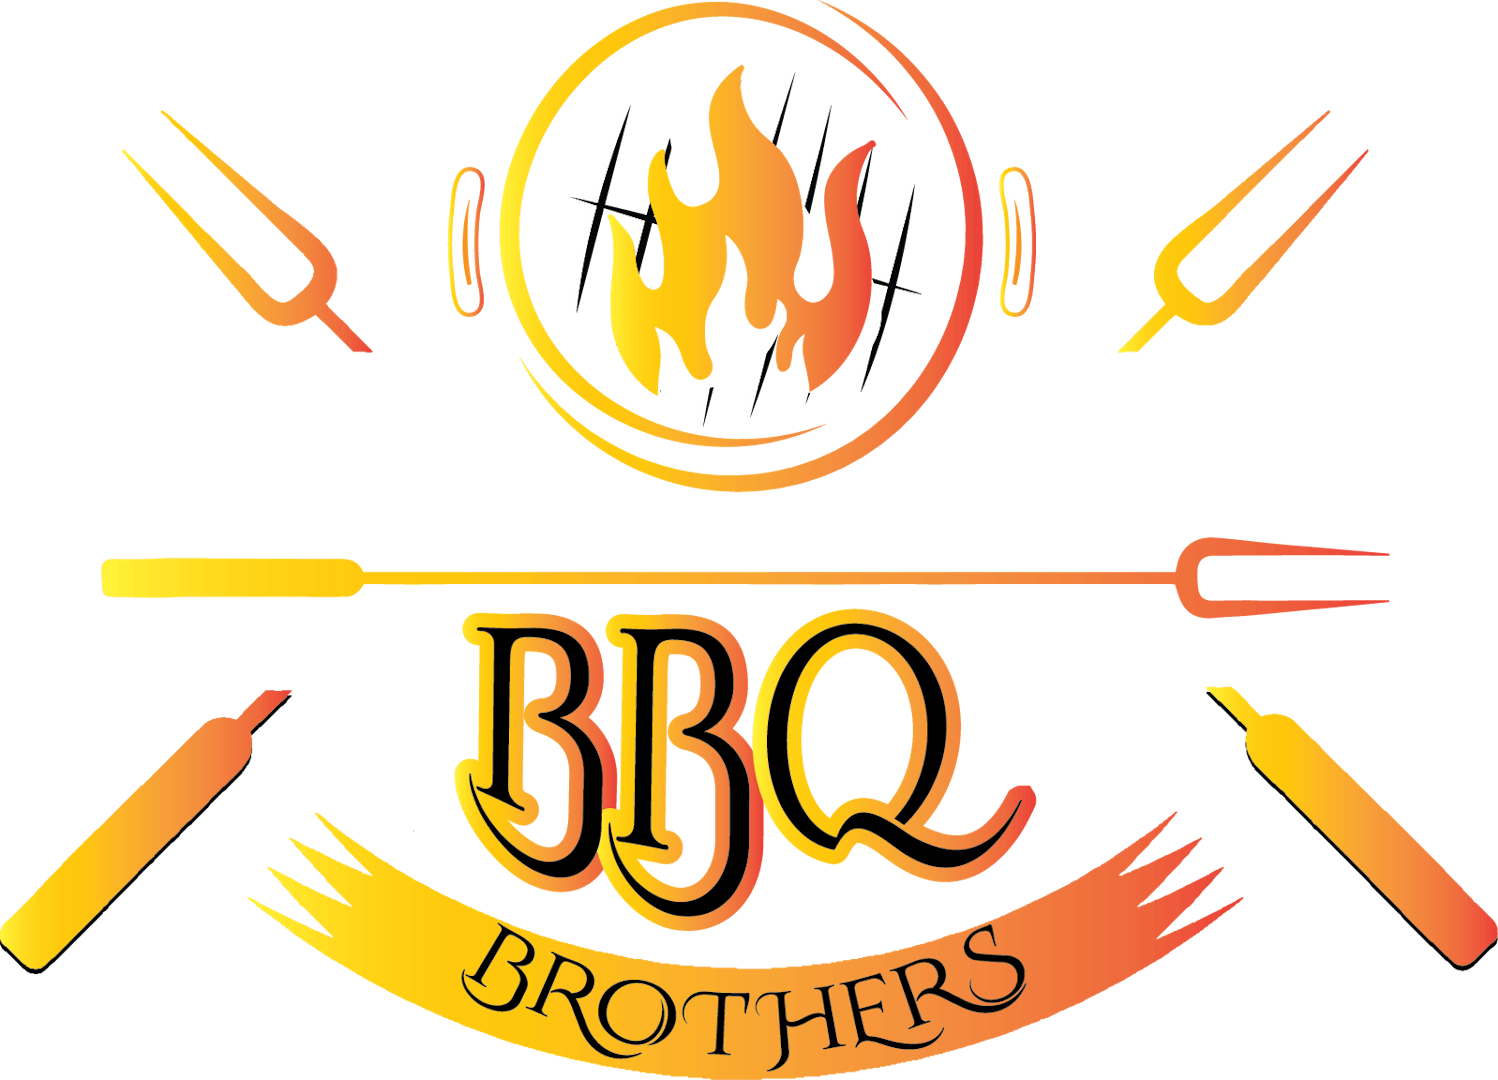 BBQ Brothers Cafe